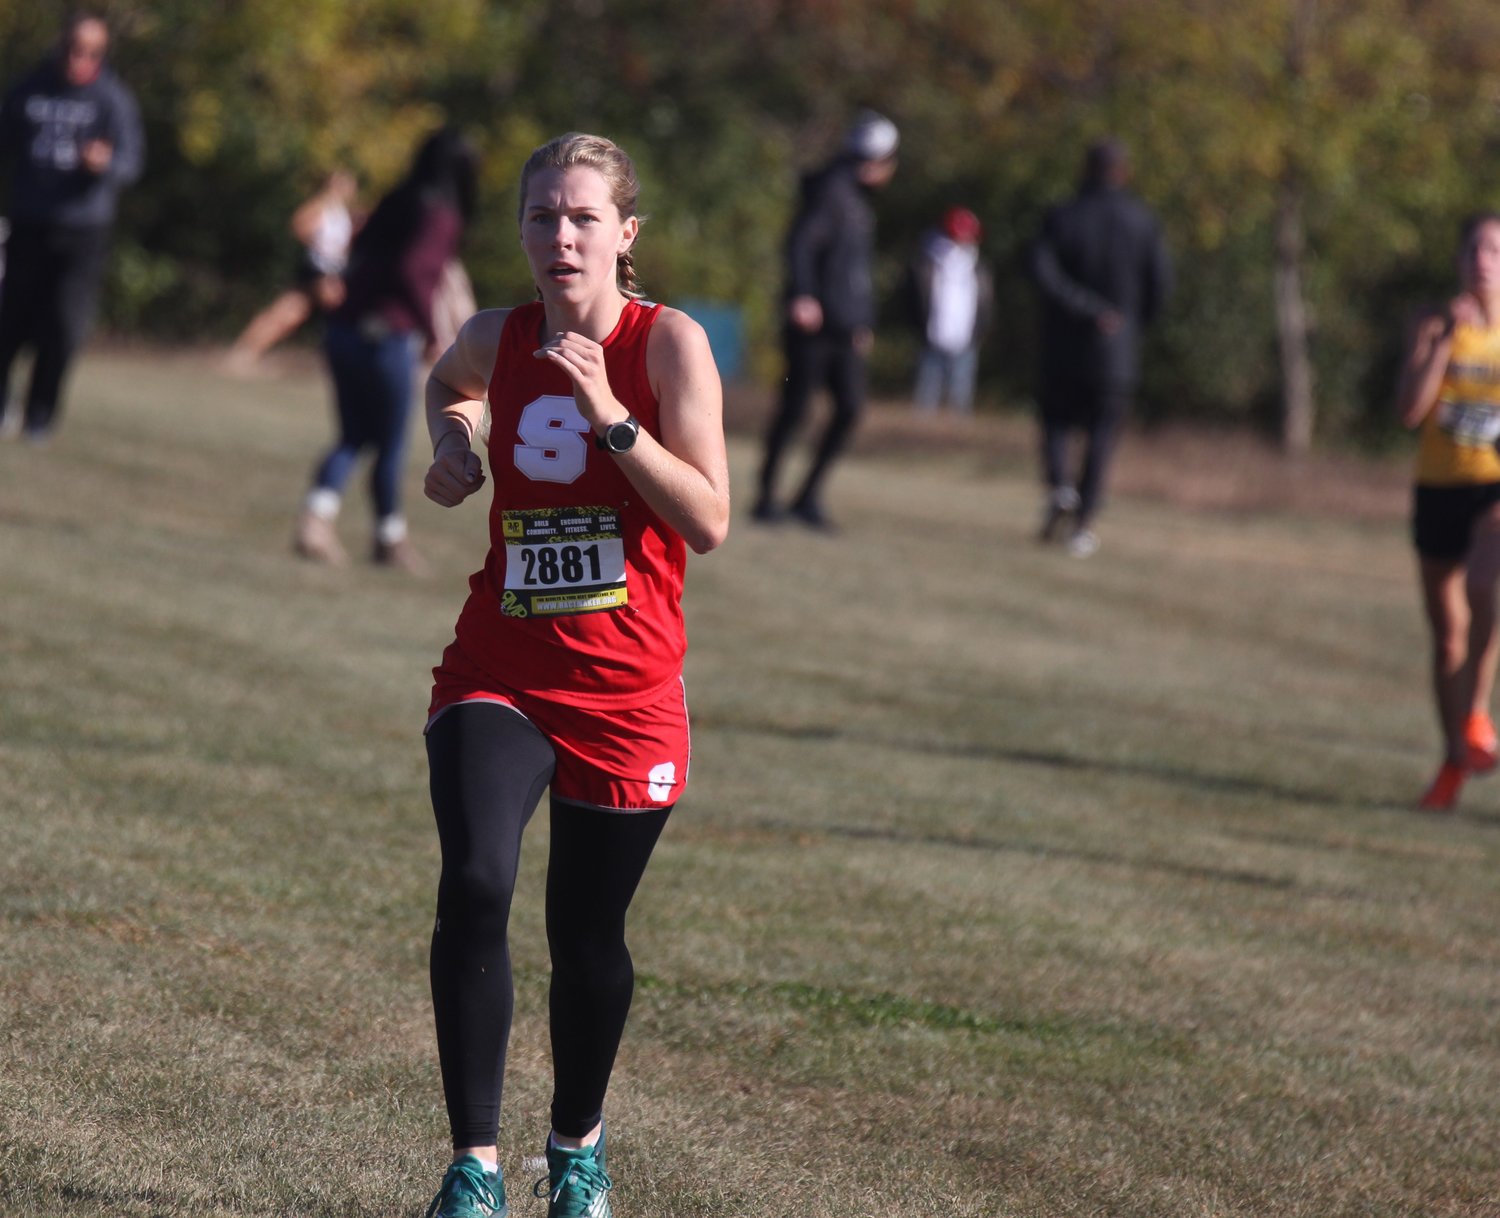 Southmont's Faith Allen will look to break through and qualify for her 1st state finals on Saturday.